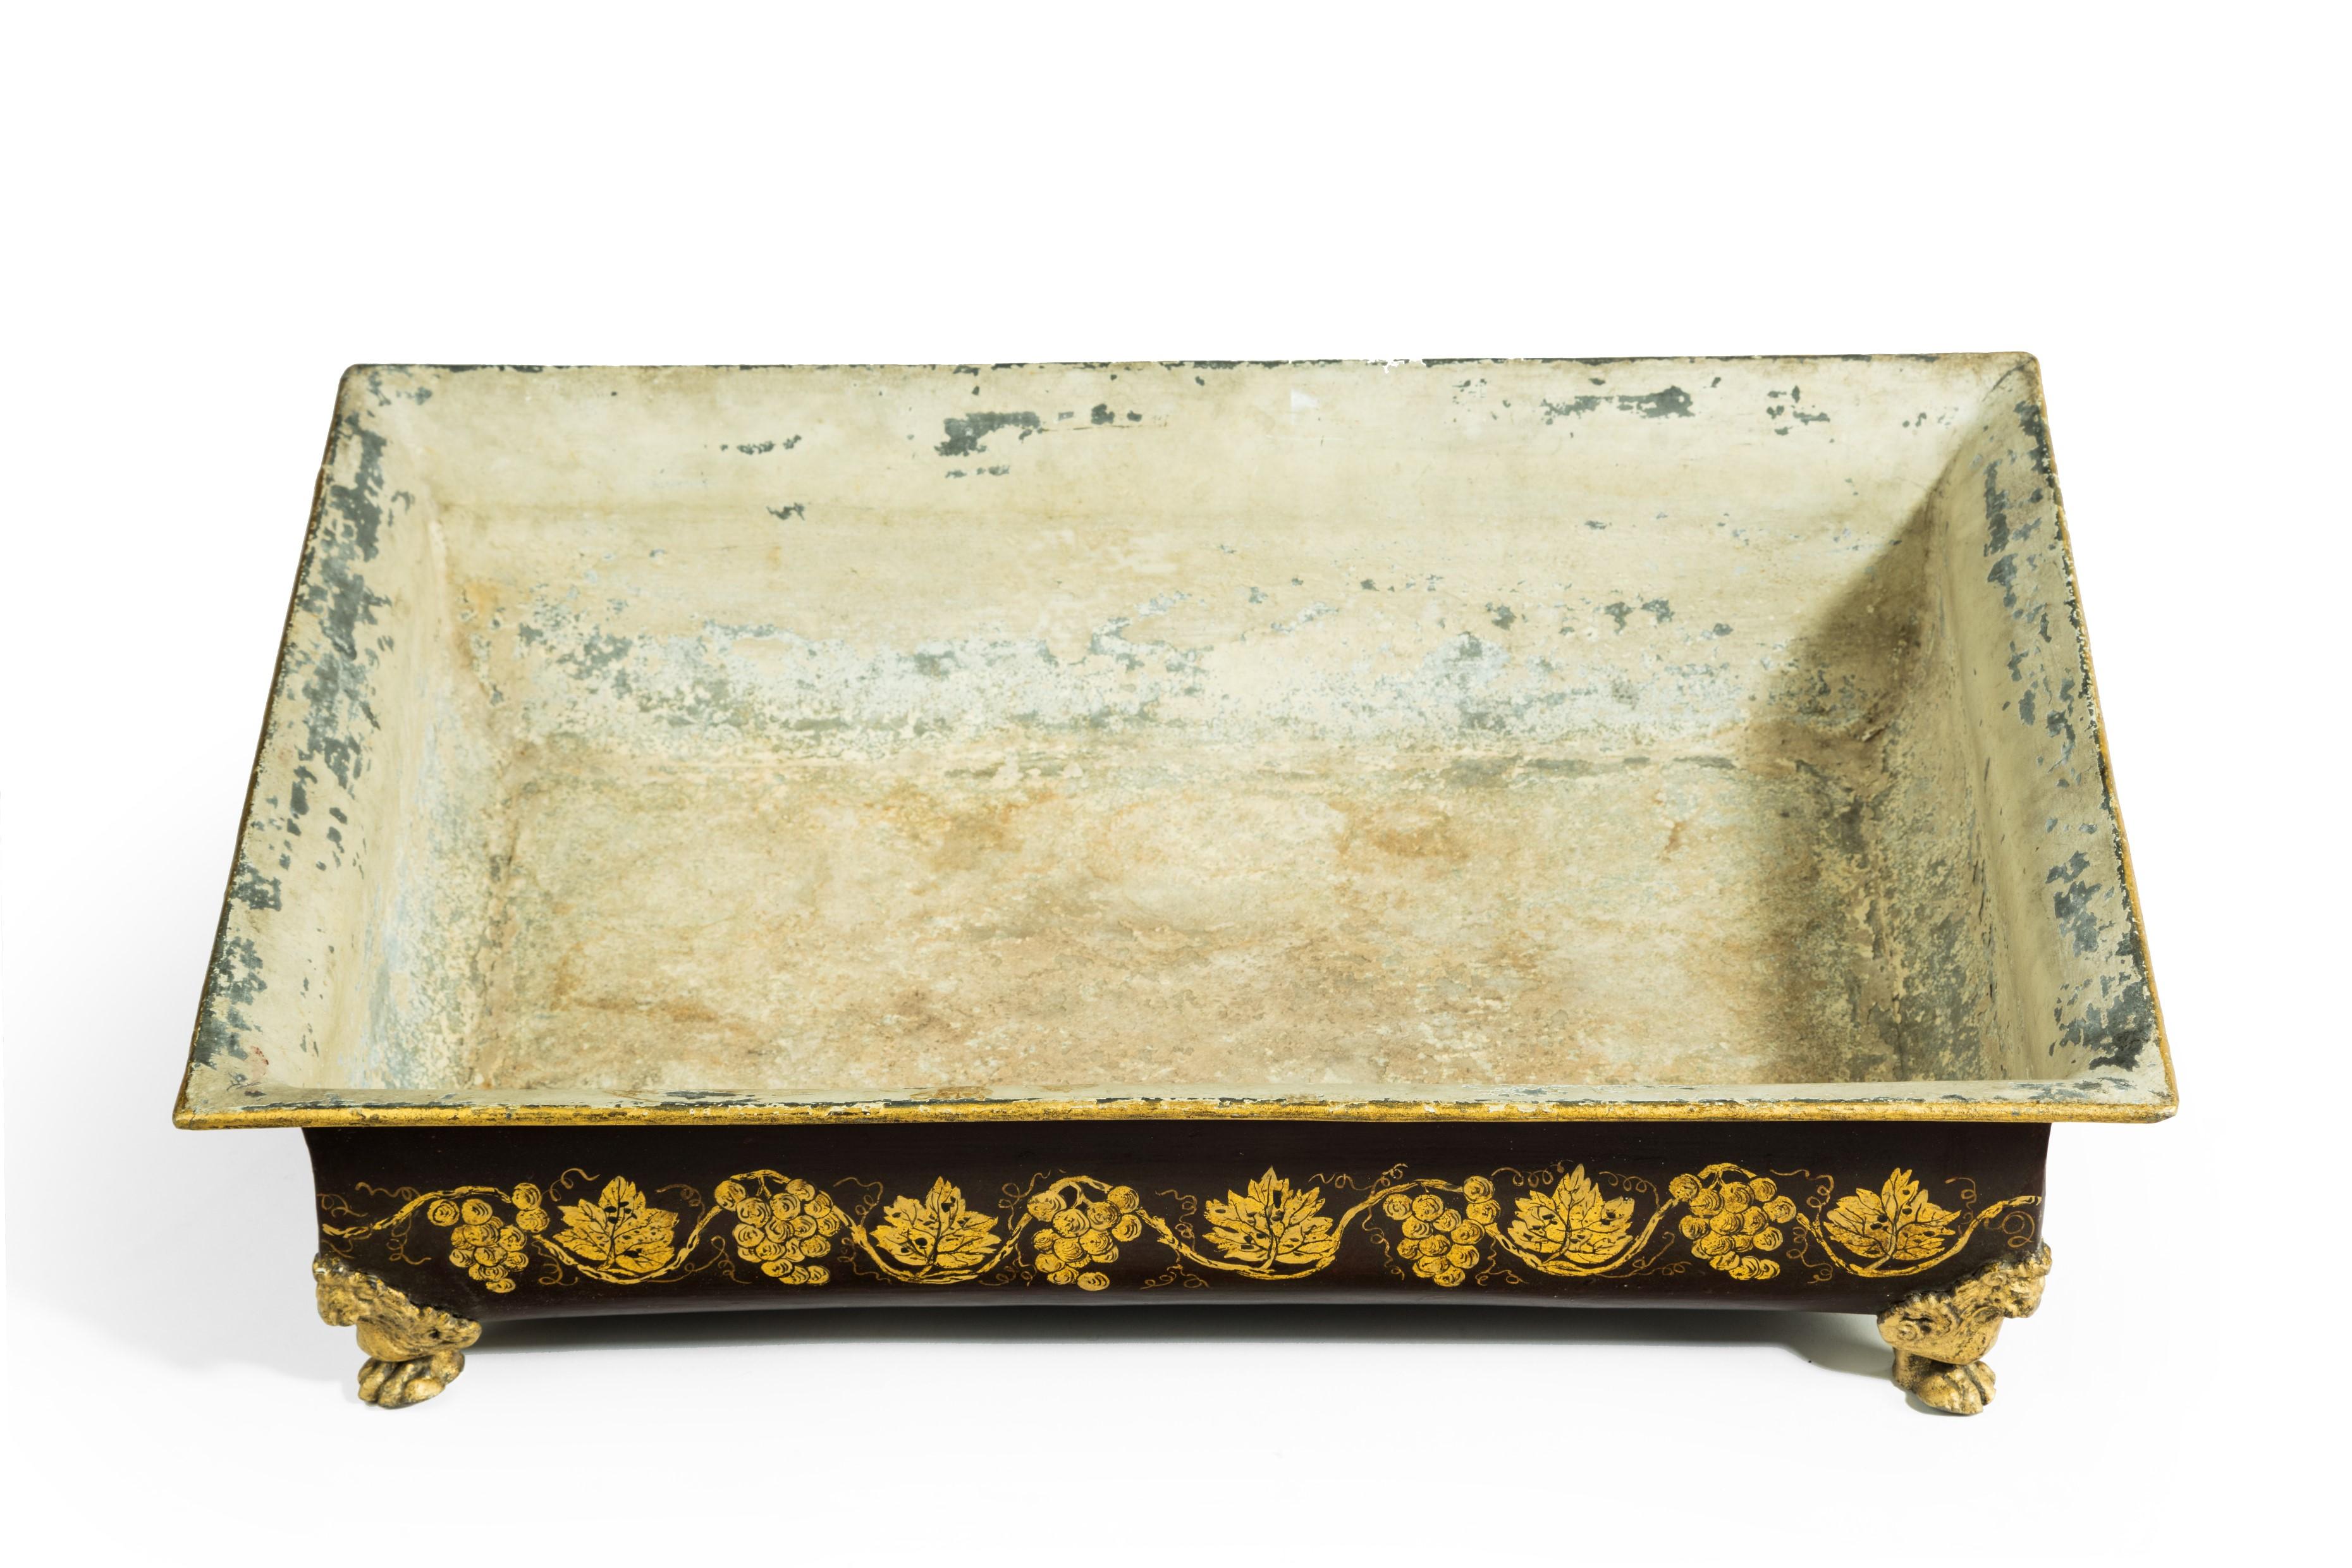 Delightful French rectangular shaped tole planter or wine cooler. Having fine gilt decoration of cascading grapes and vines on a rich aubergine ground. The whole is supported on lion masks on paw feet in each corner, French, circa 1860.